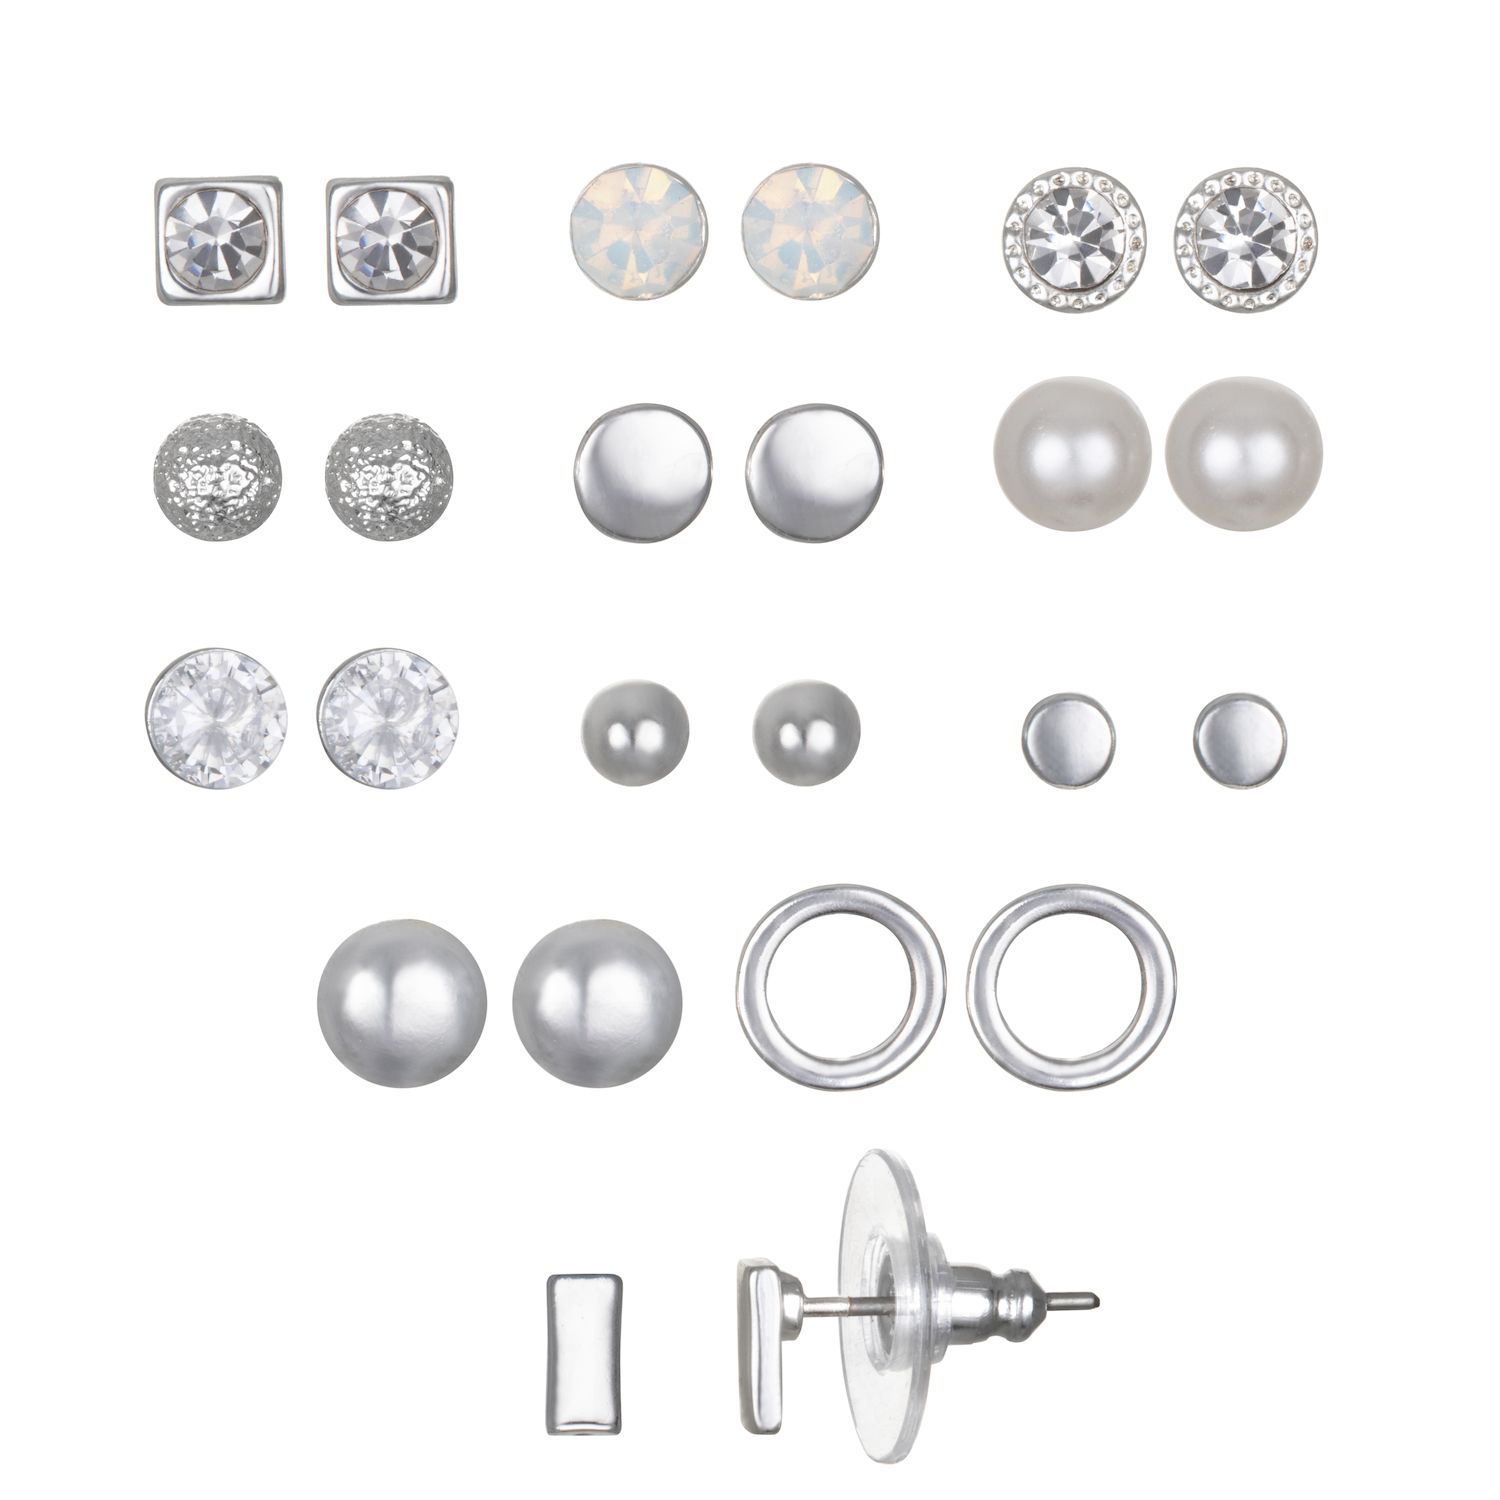 Image for LC Lauren Conrad White Circle Stud Earrings Set of 12 at Kohl's.